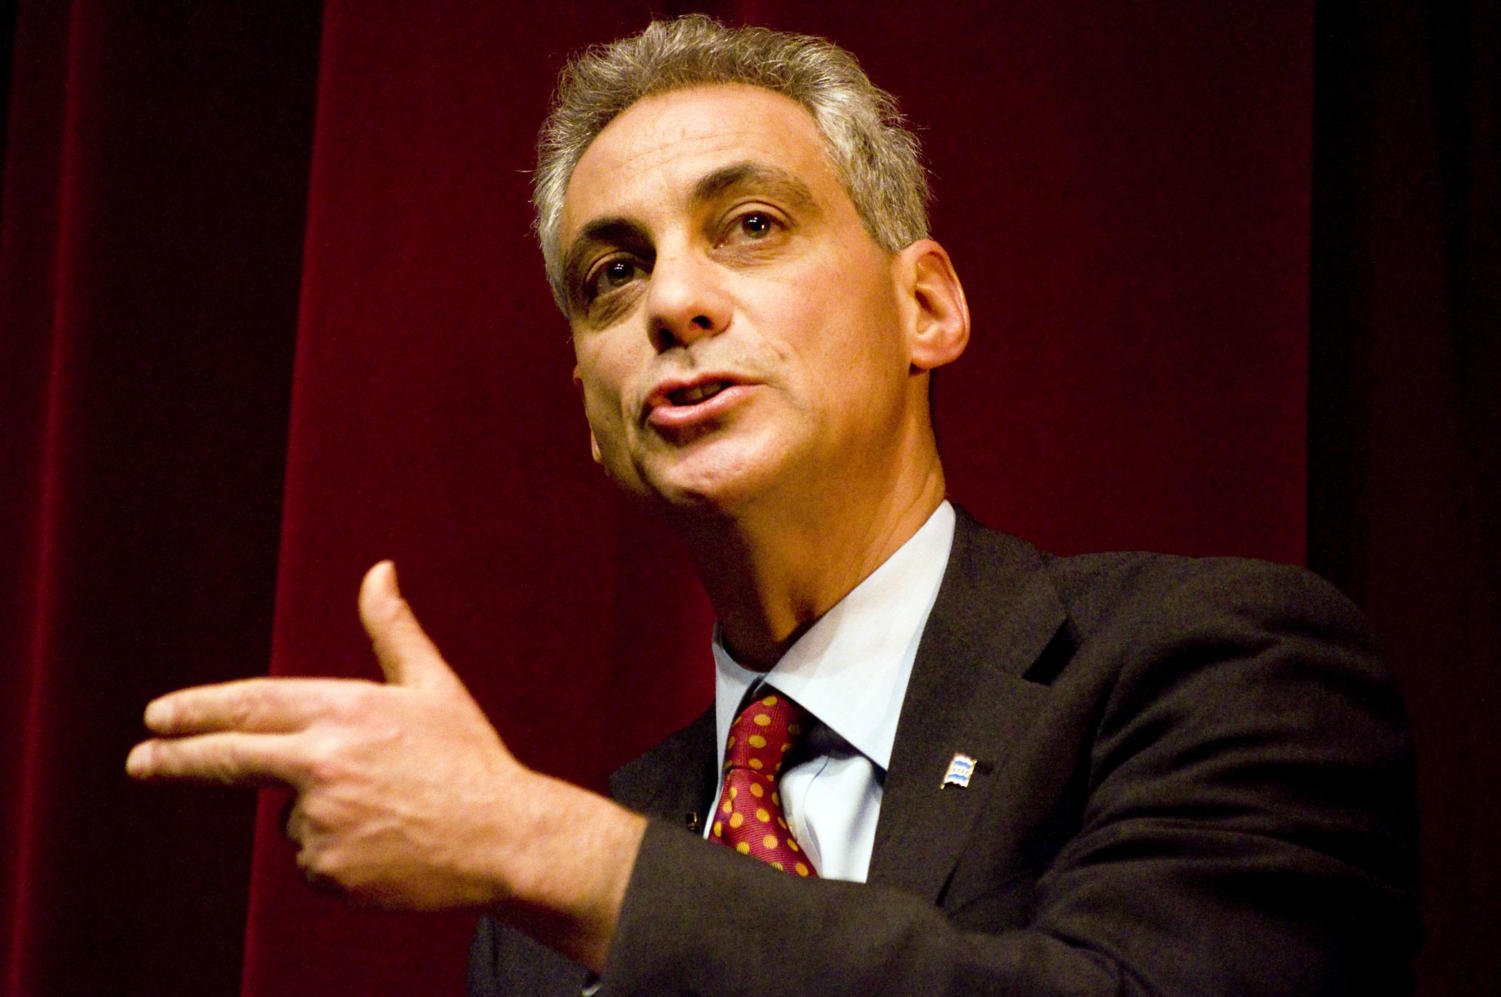 Rahm Emanuel received many criticisms throughout the debate from the other candidates at the mayoral debate hosted by The Defender at the Dusable Museum on Wednesday night.